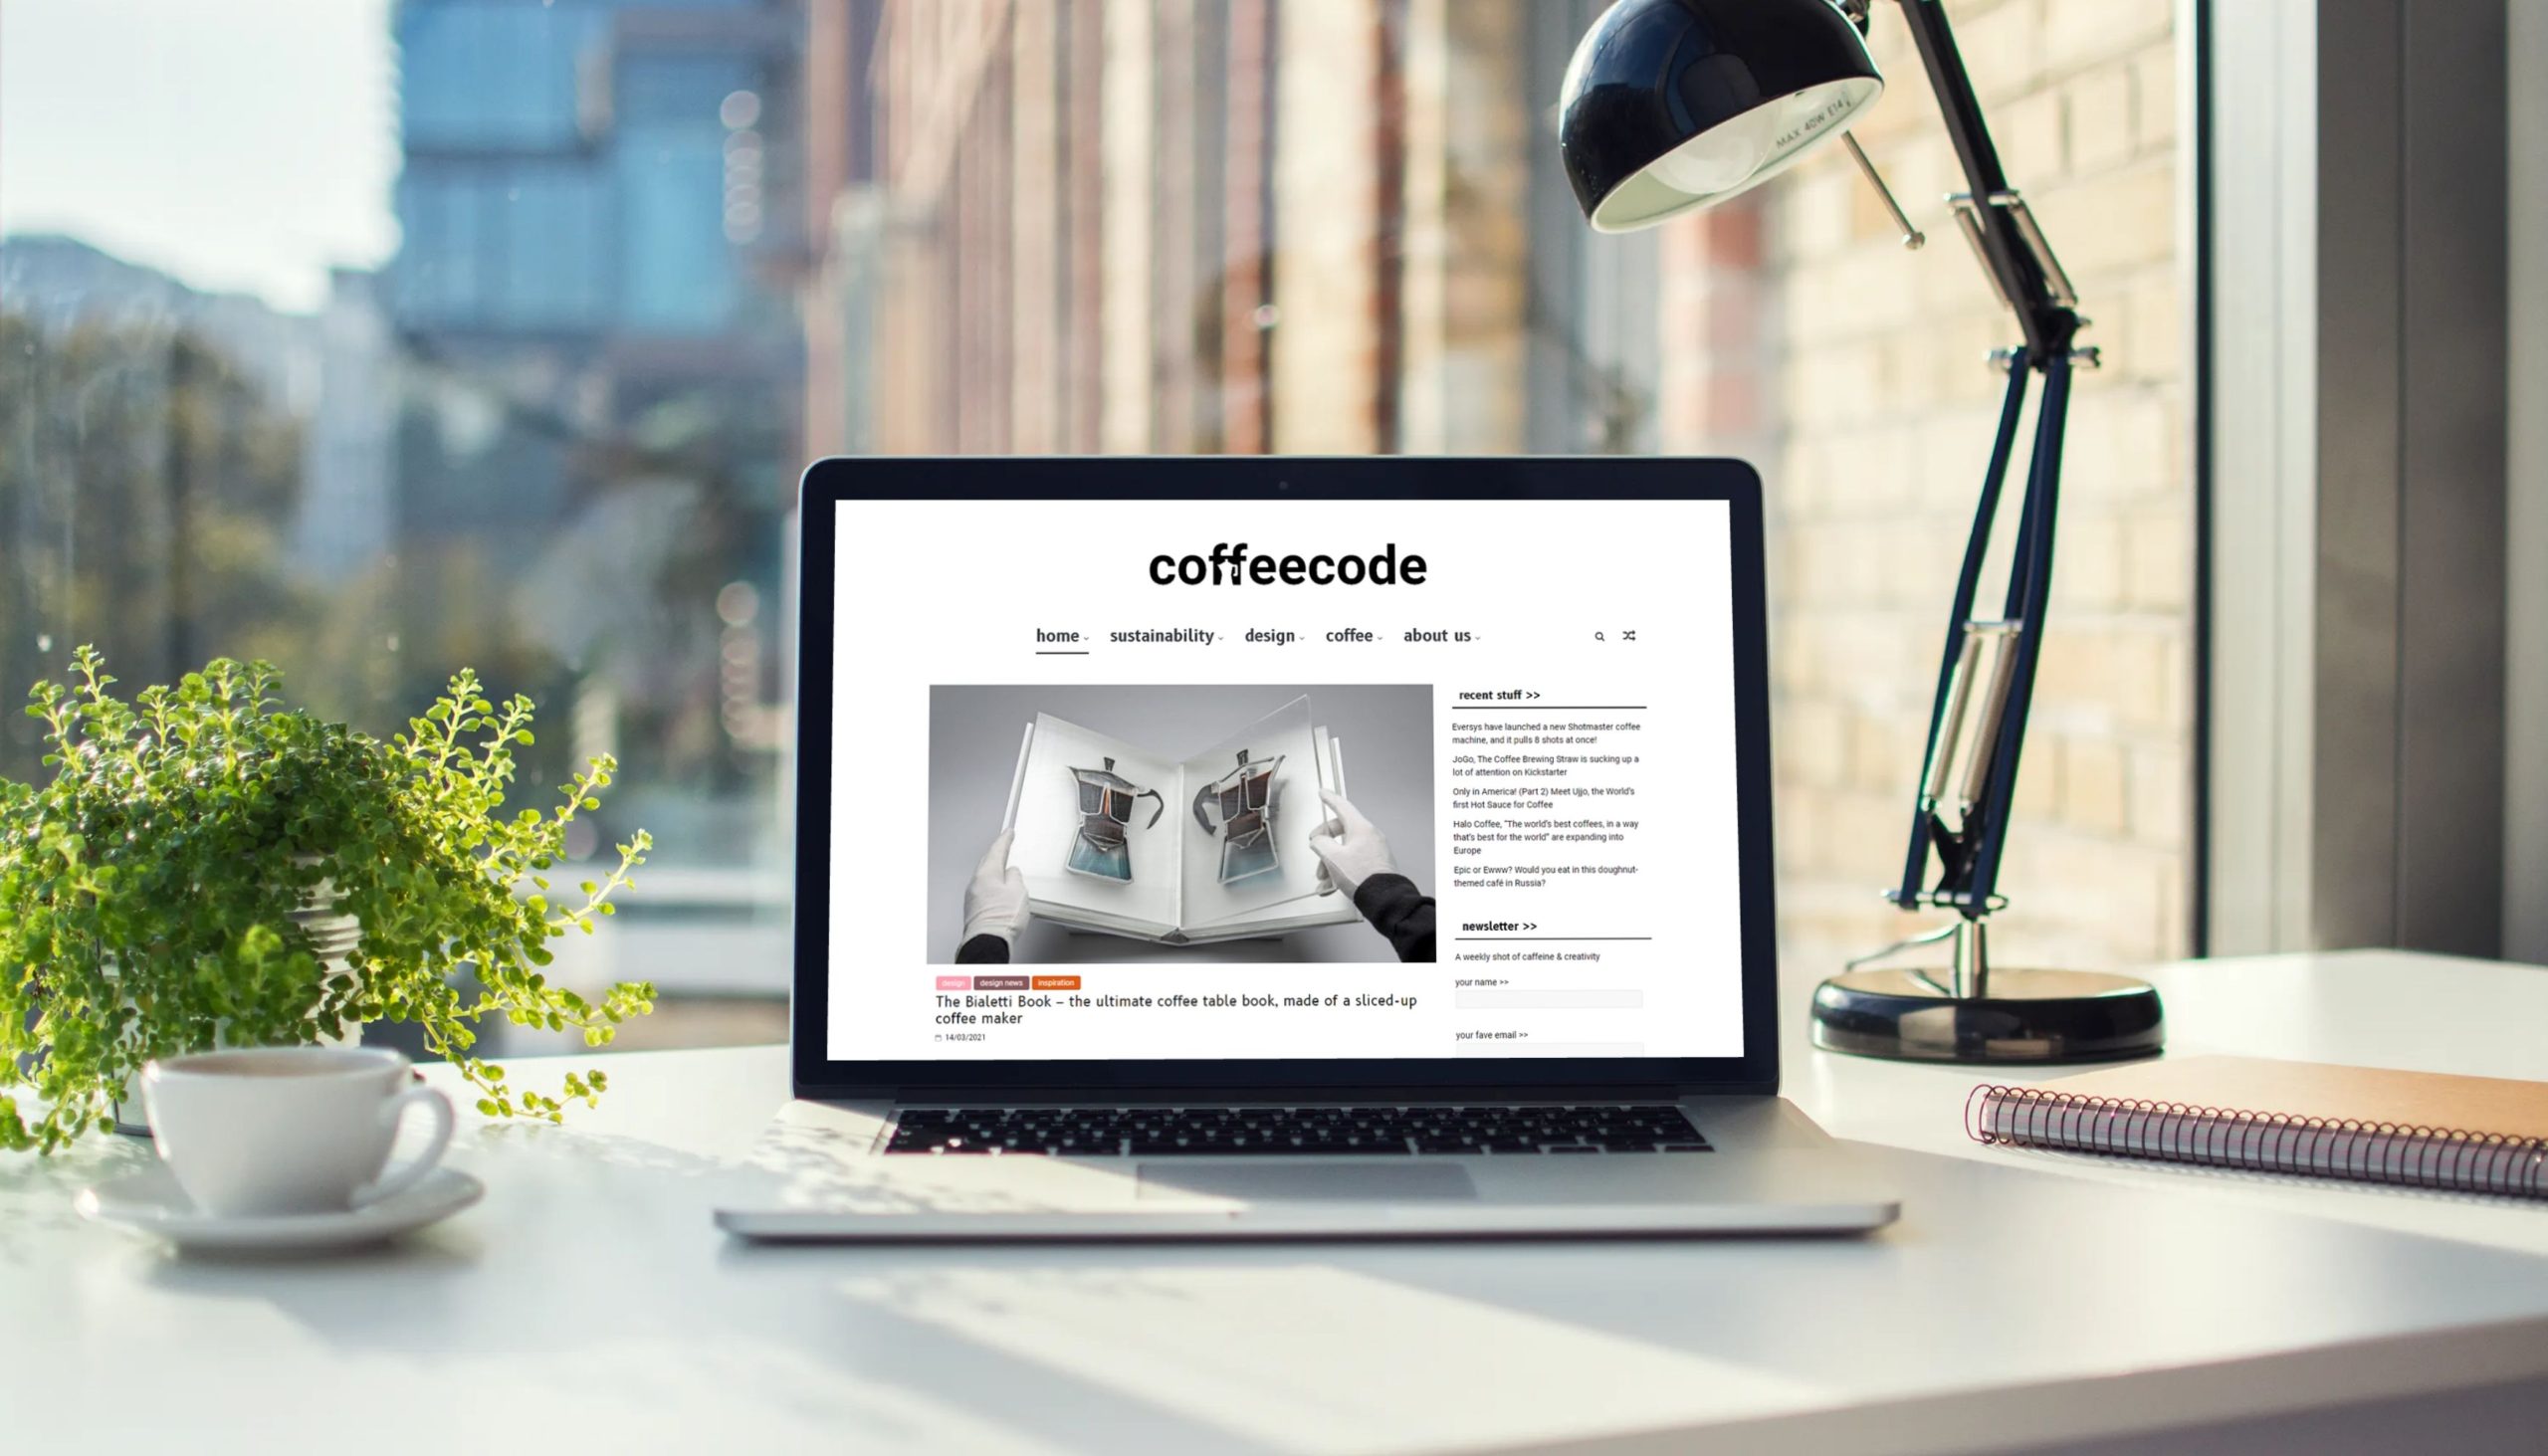 The 50 Best Coffee Blogs 2021 (updated)